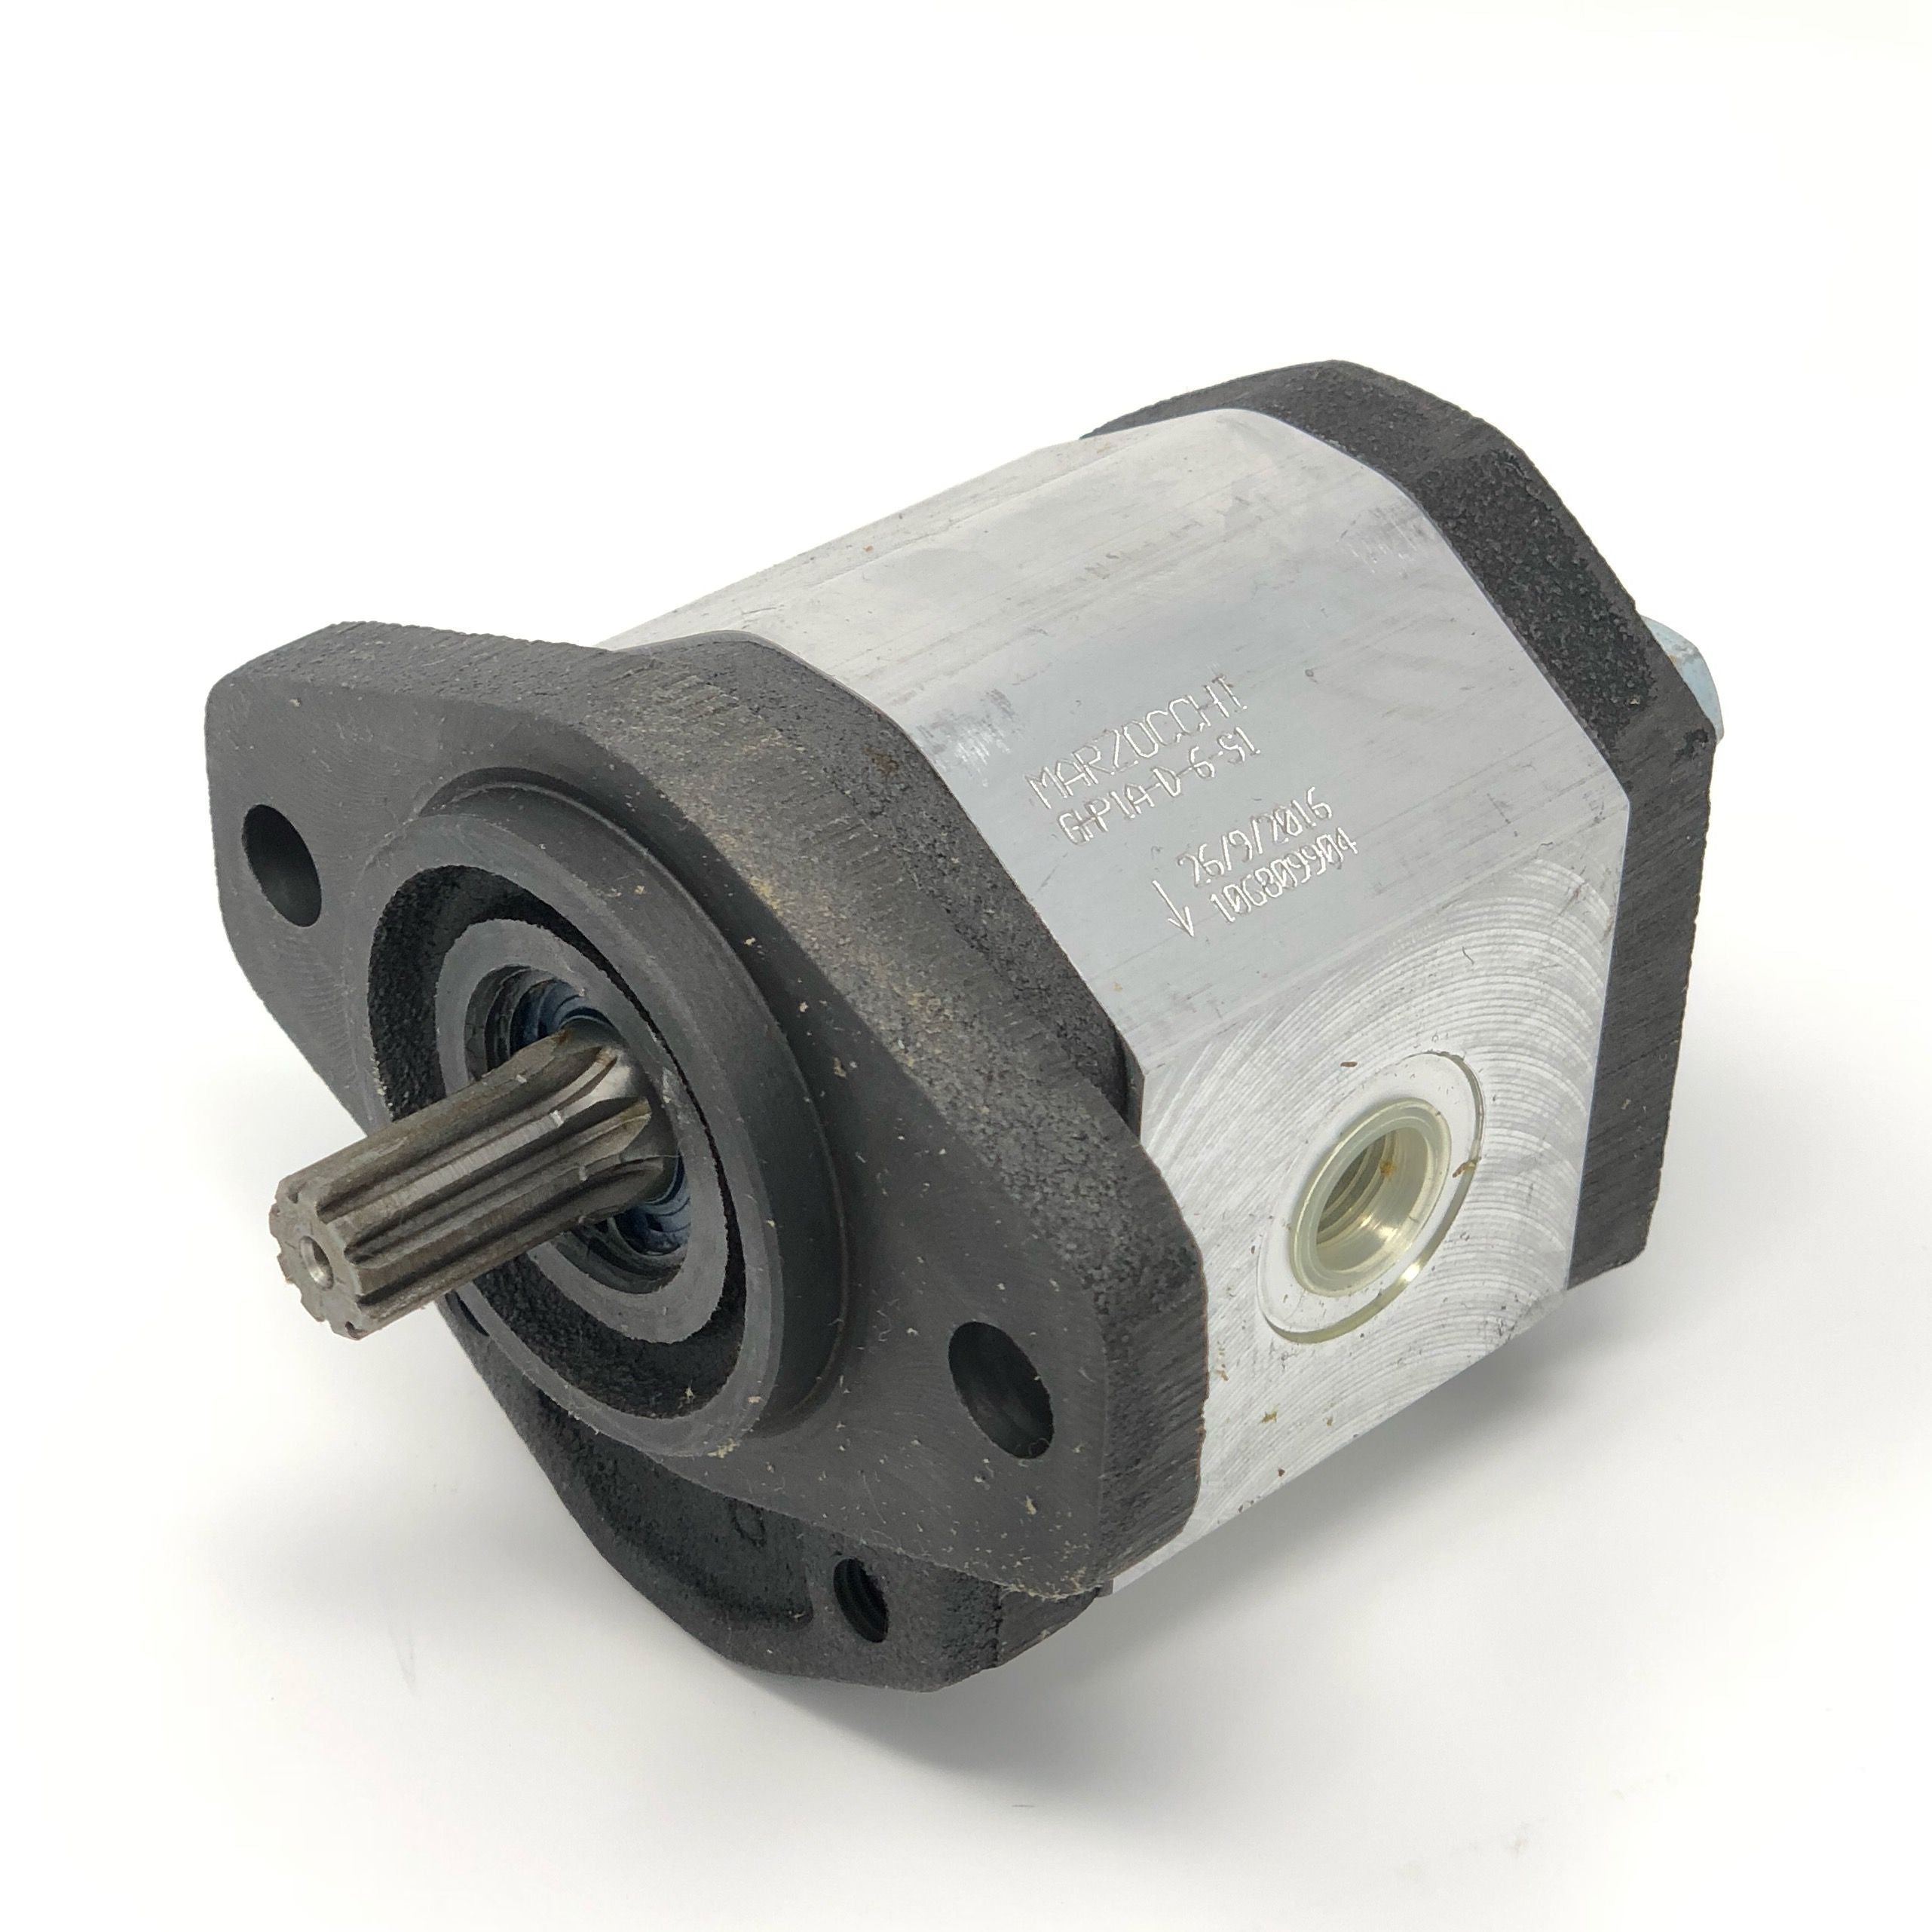 GHP1A-S-9-S1 : Marzocchi Gear Pump, CCW, 6.2cc (0.3782in3), 2.95 GPM, 3770psi, 3000 RPM, #8 SAE (1/2") In, #6 SAE (3/8") Out, Splined Shaft 9T 20/40DP, SAE AA 2-Bolt Mount